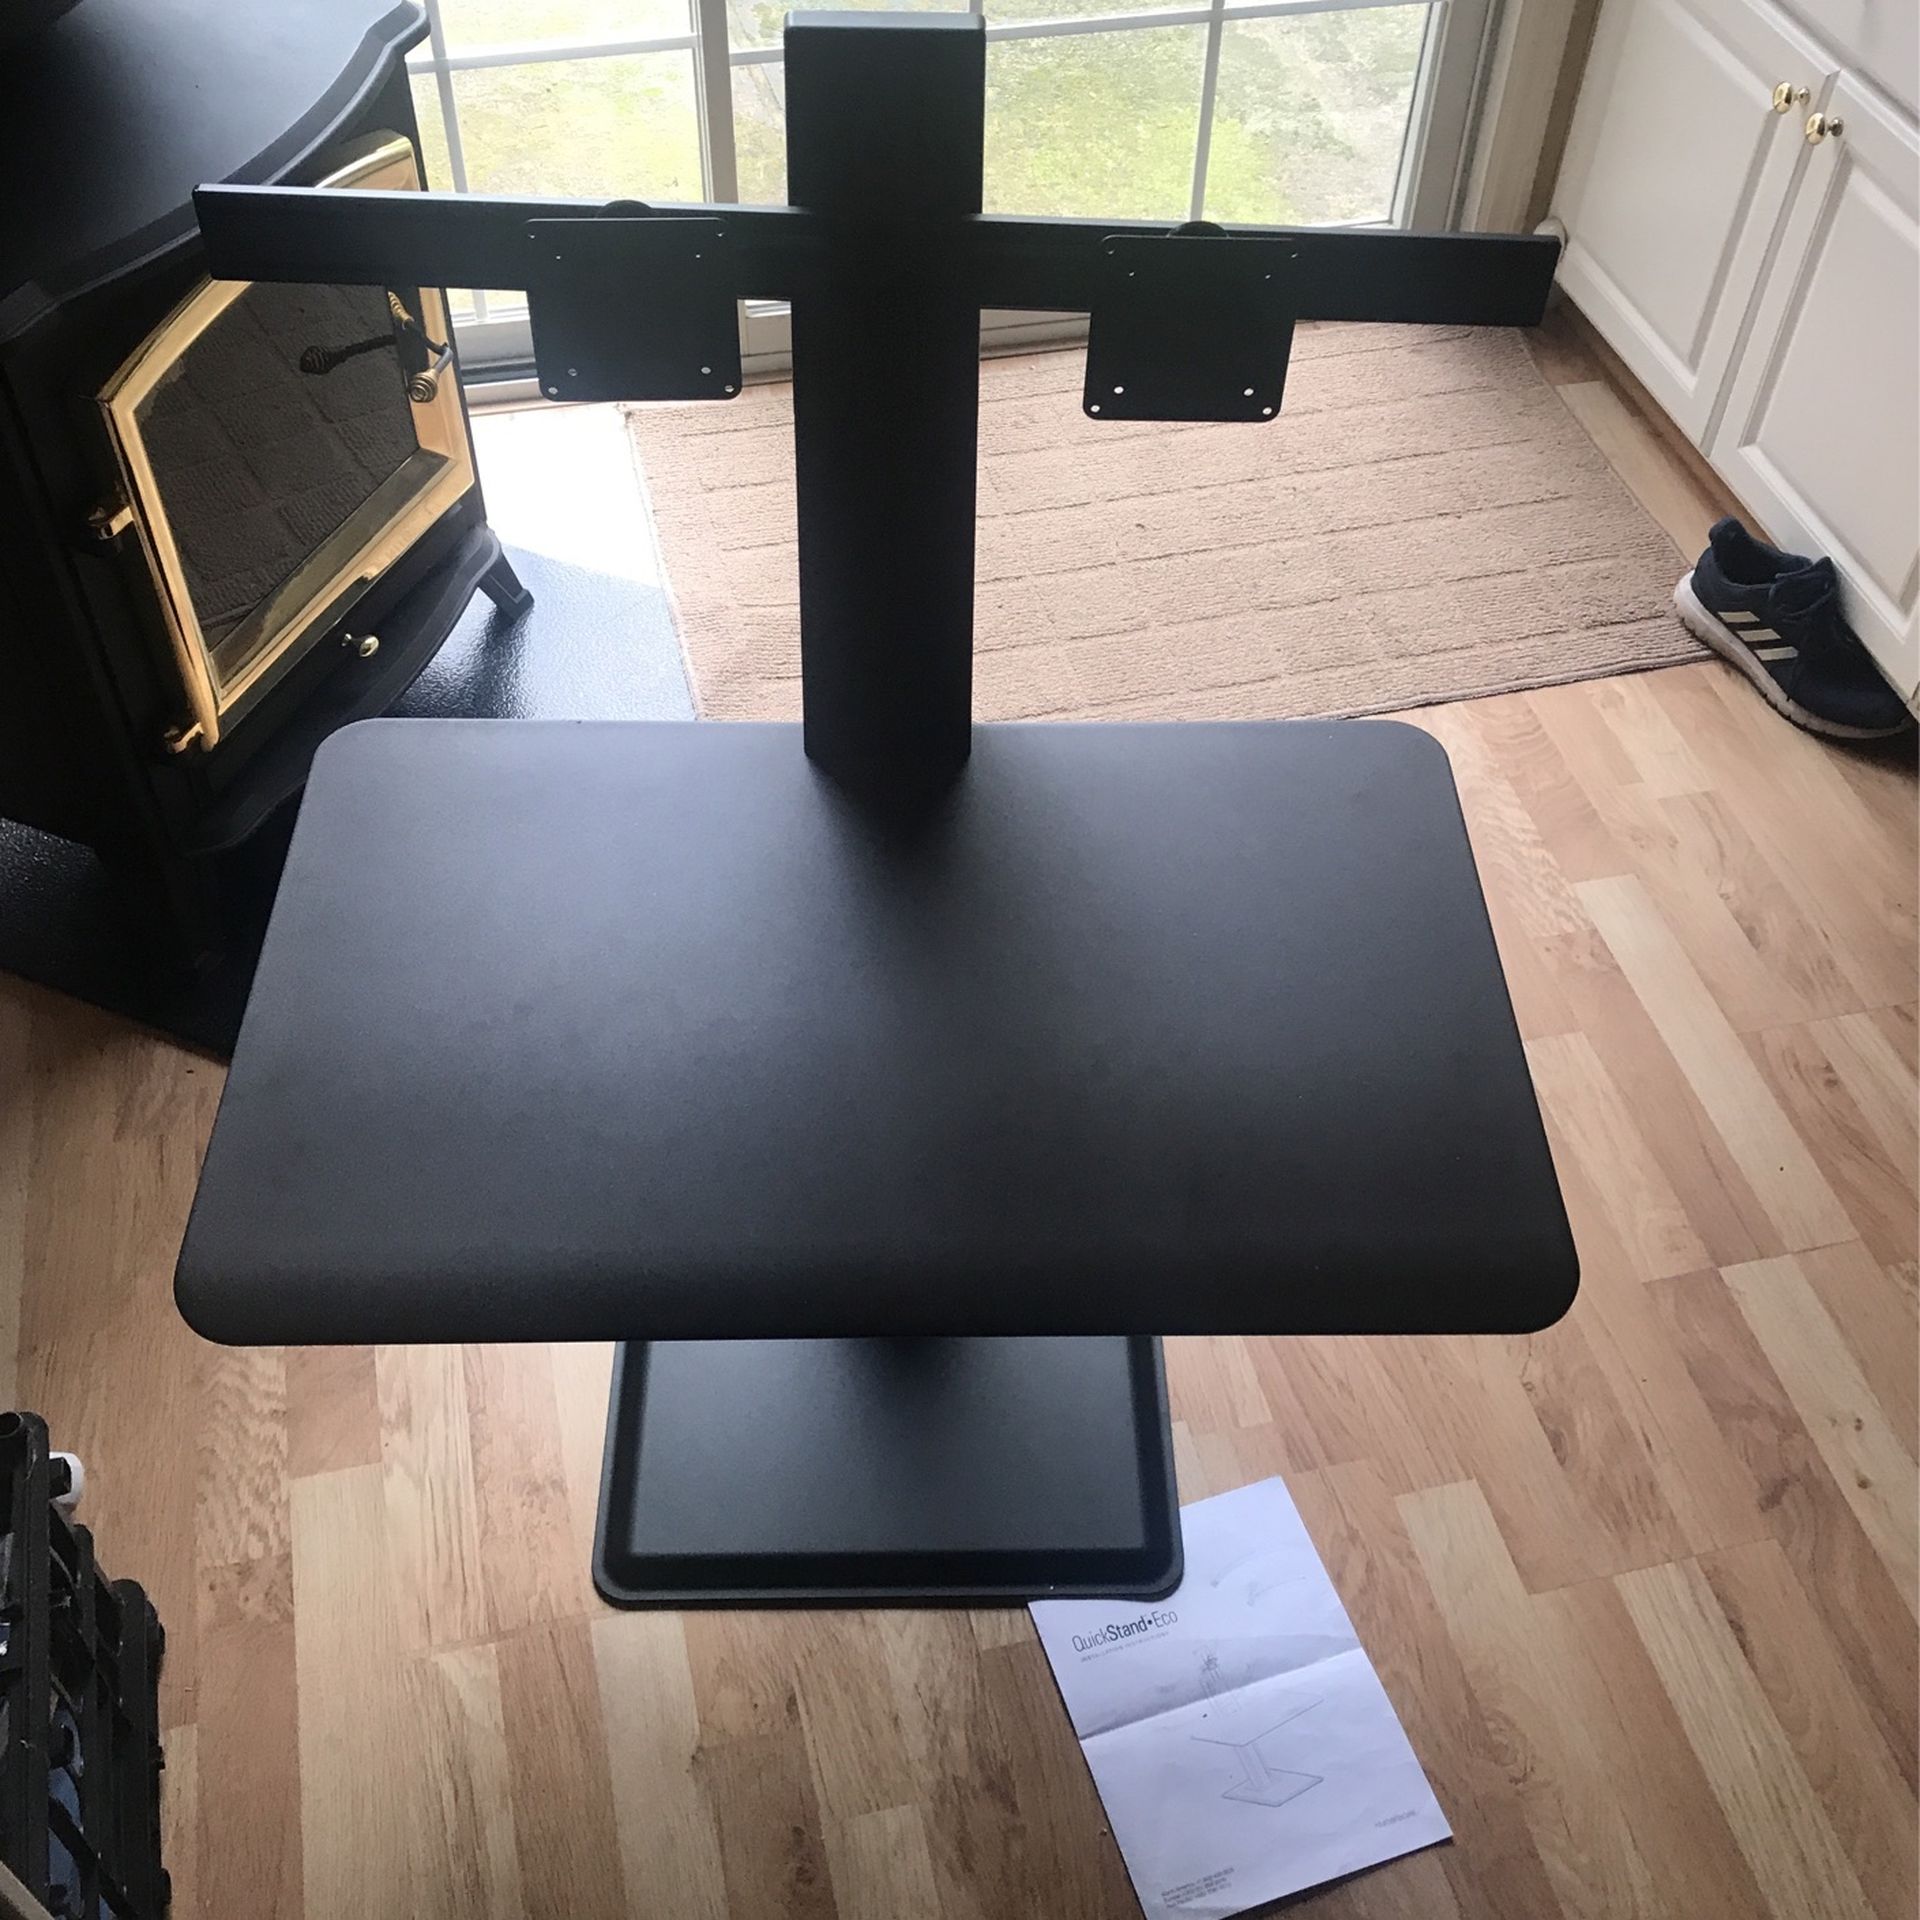 Dual Monitor Stand For Sit Or Standing